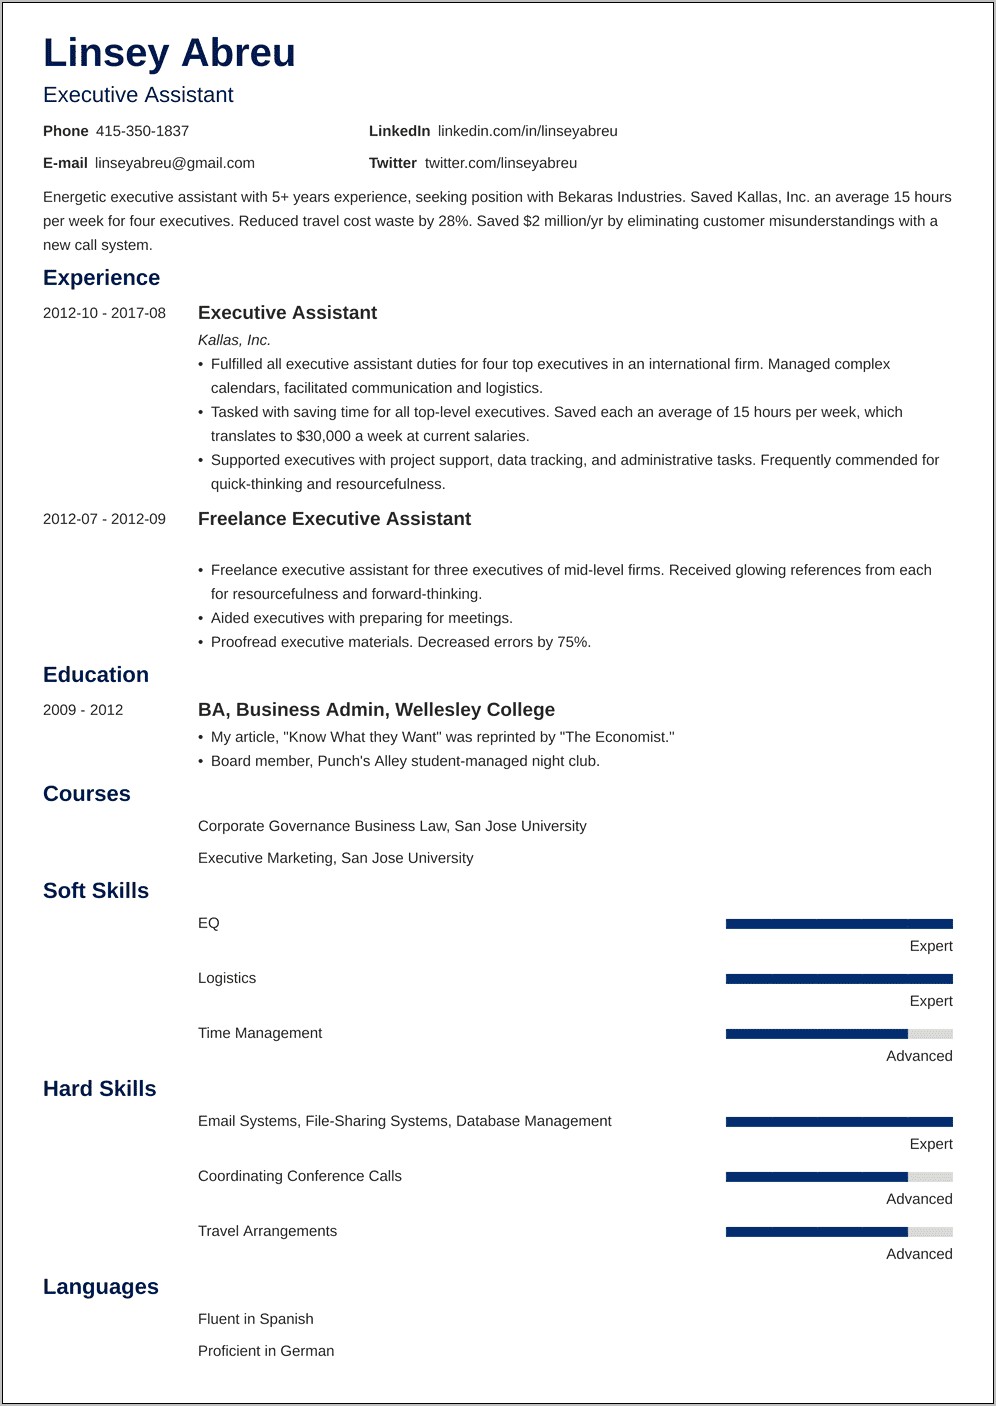 Sample Executive Assistant Resume With Gaps In Employment